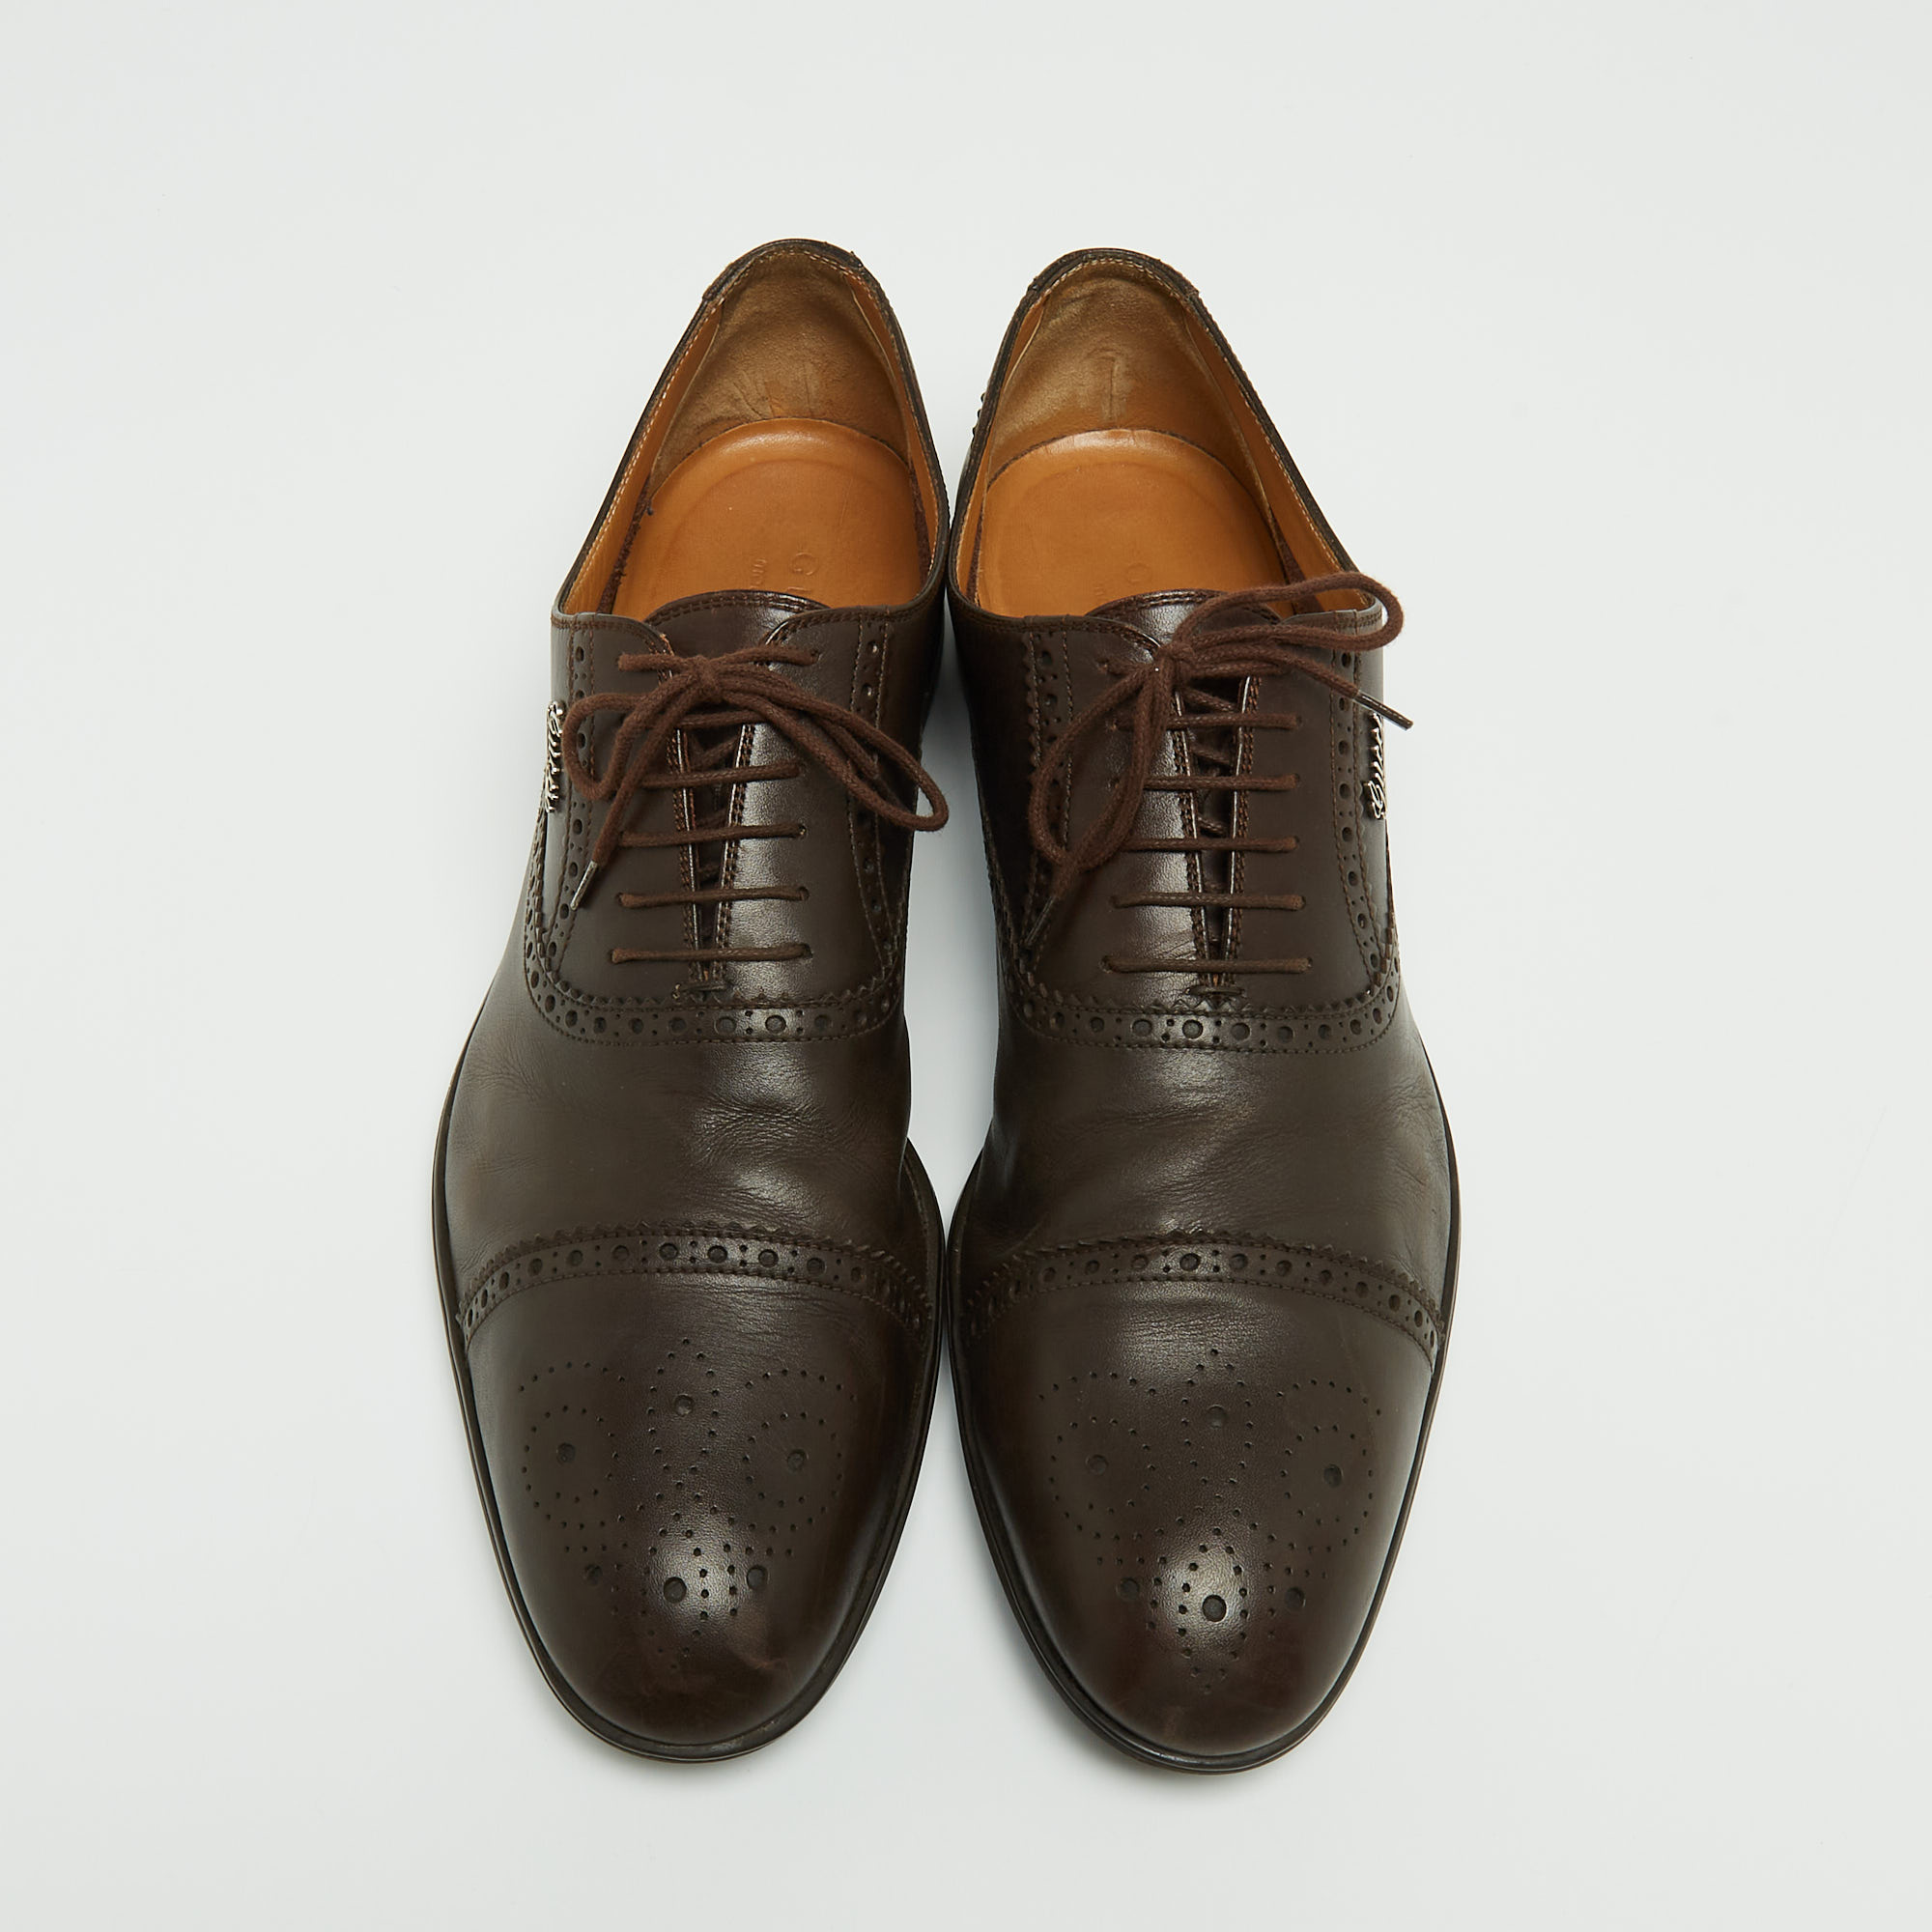 Gucci Brown Leather Brogue Oxfords Size 45.5